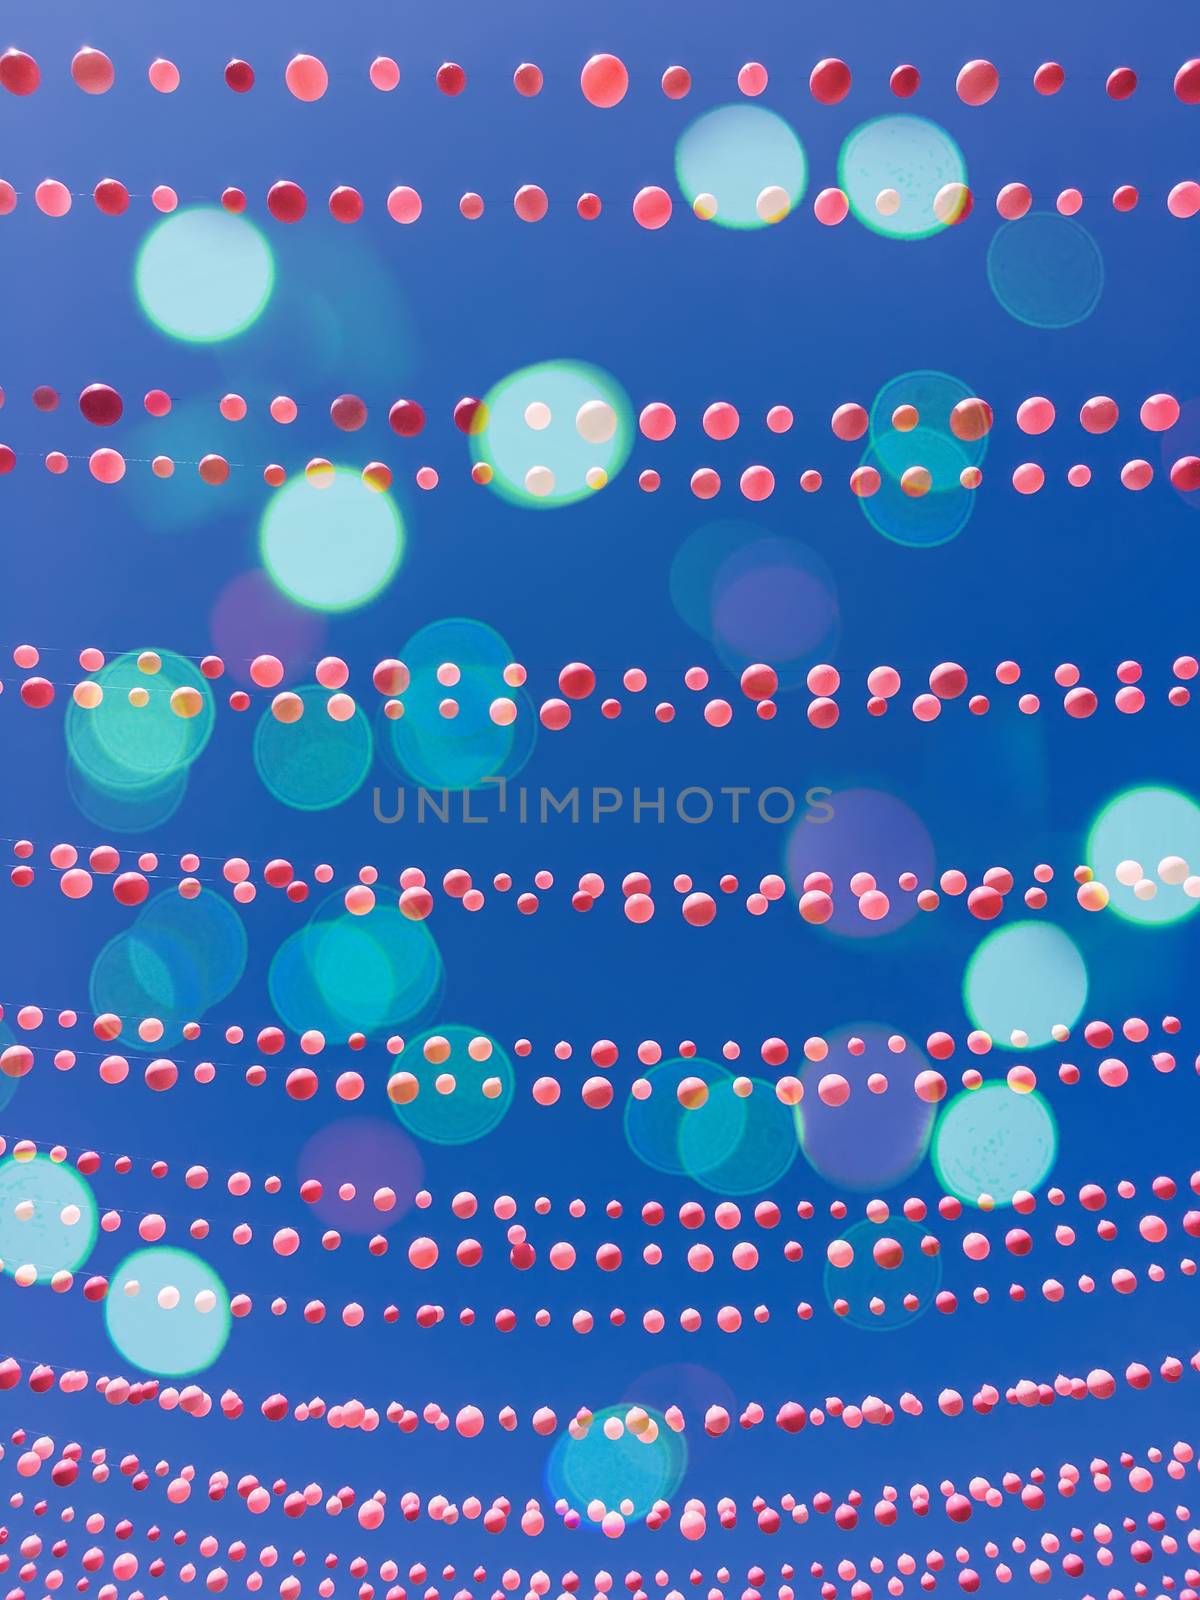 Blue sky background with balloon decorations and bokeh lights by anikasalsera